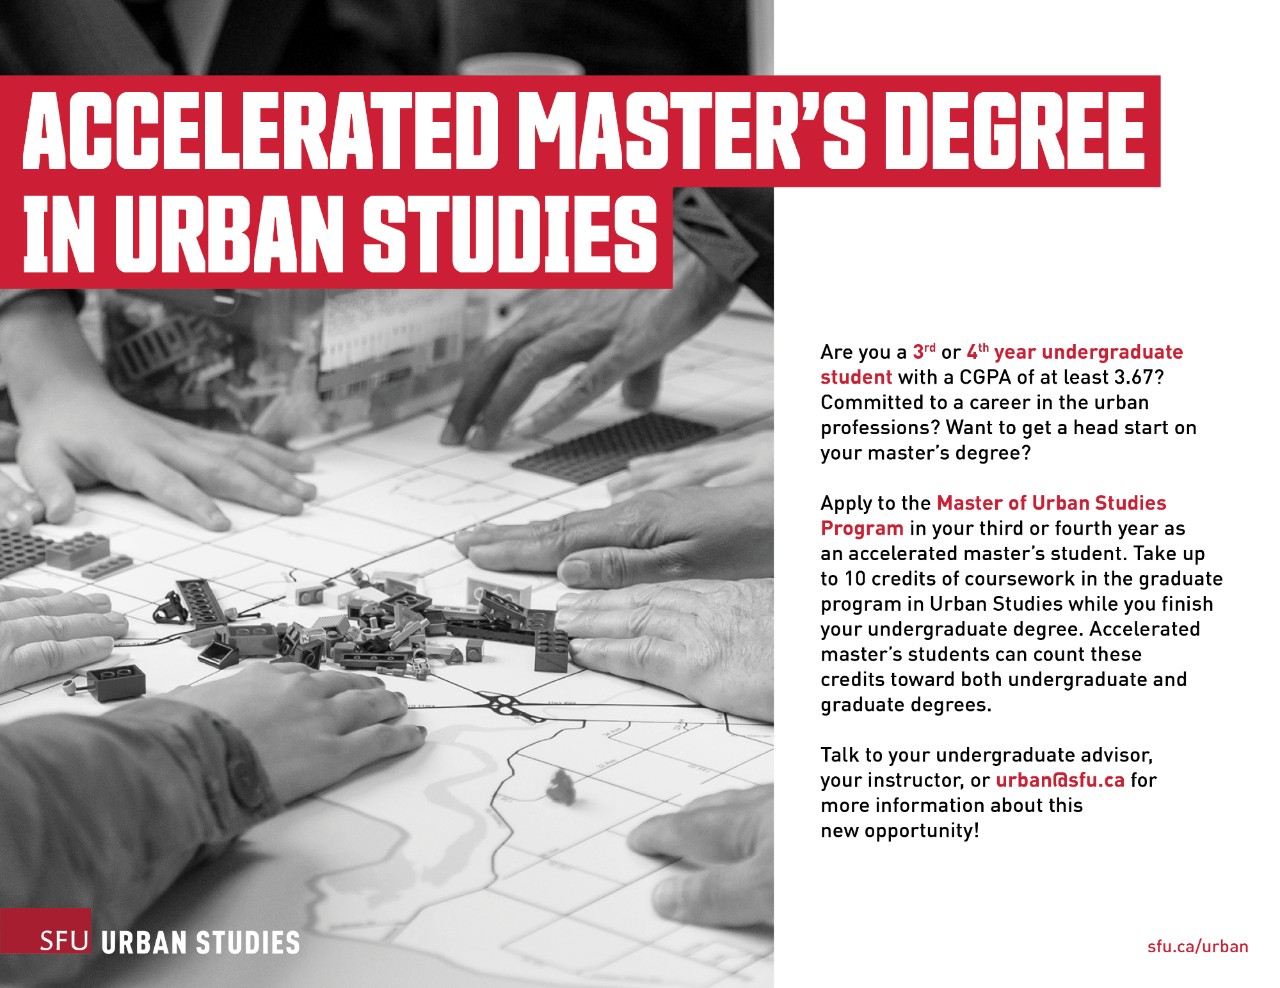 Information slide for the Accelerated Master's Degree in Urban Studies